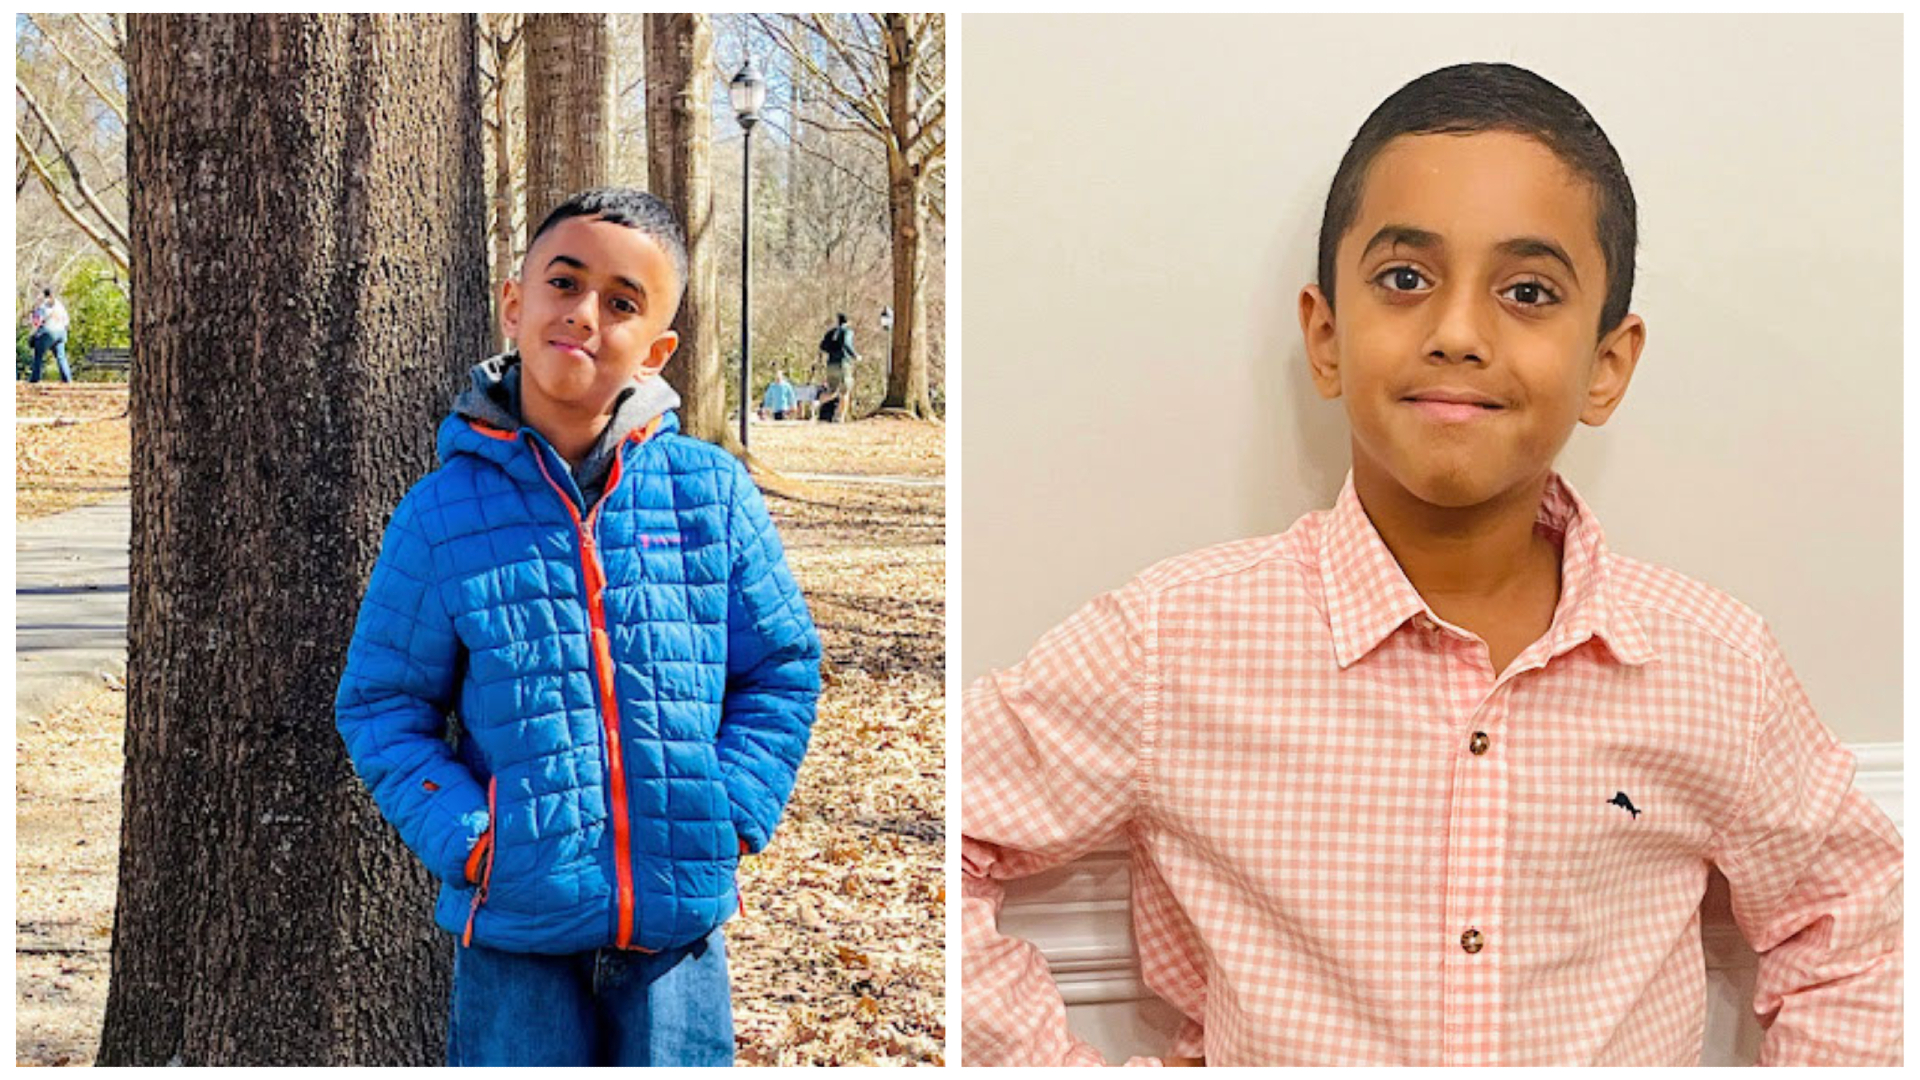 Born with posterior urethral valve and kidney failure, Rayaan has needed urologic and kidney care all his life.